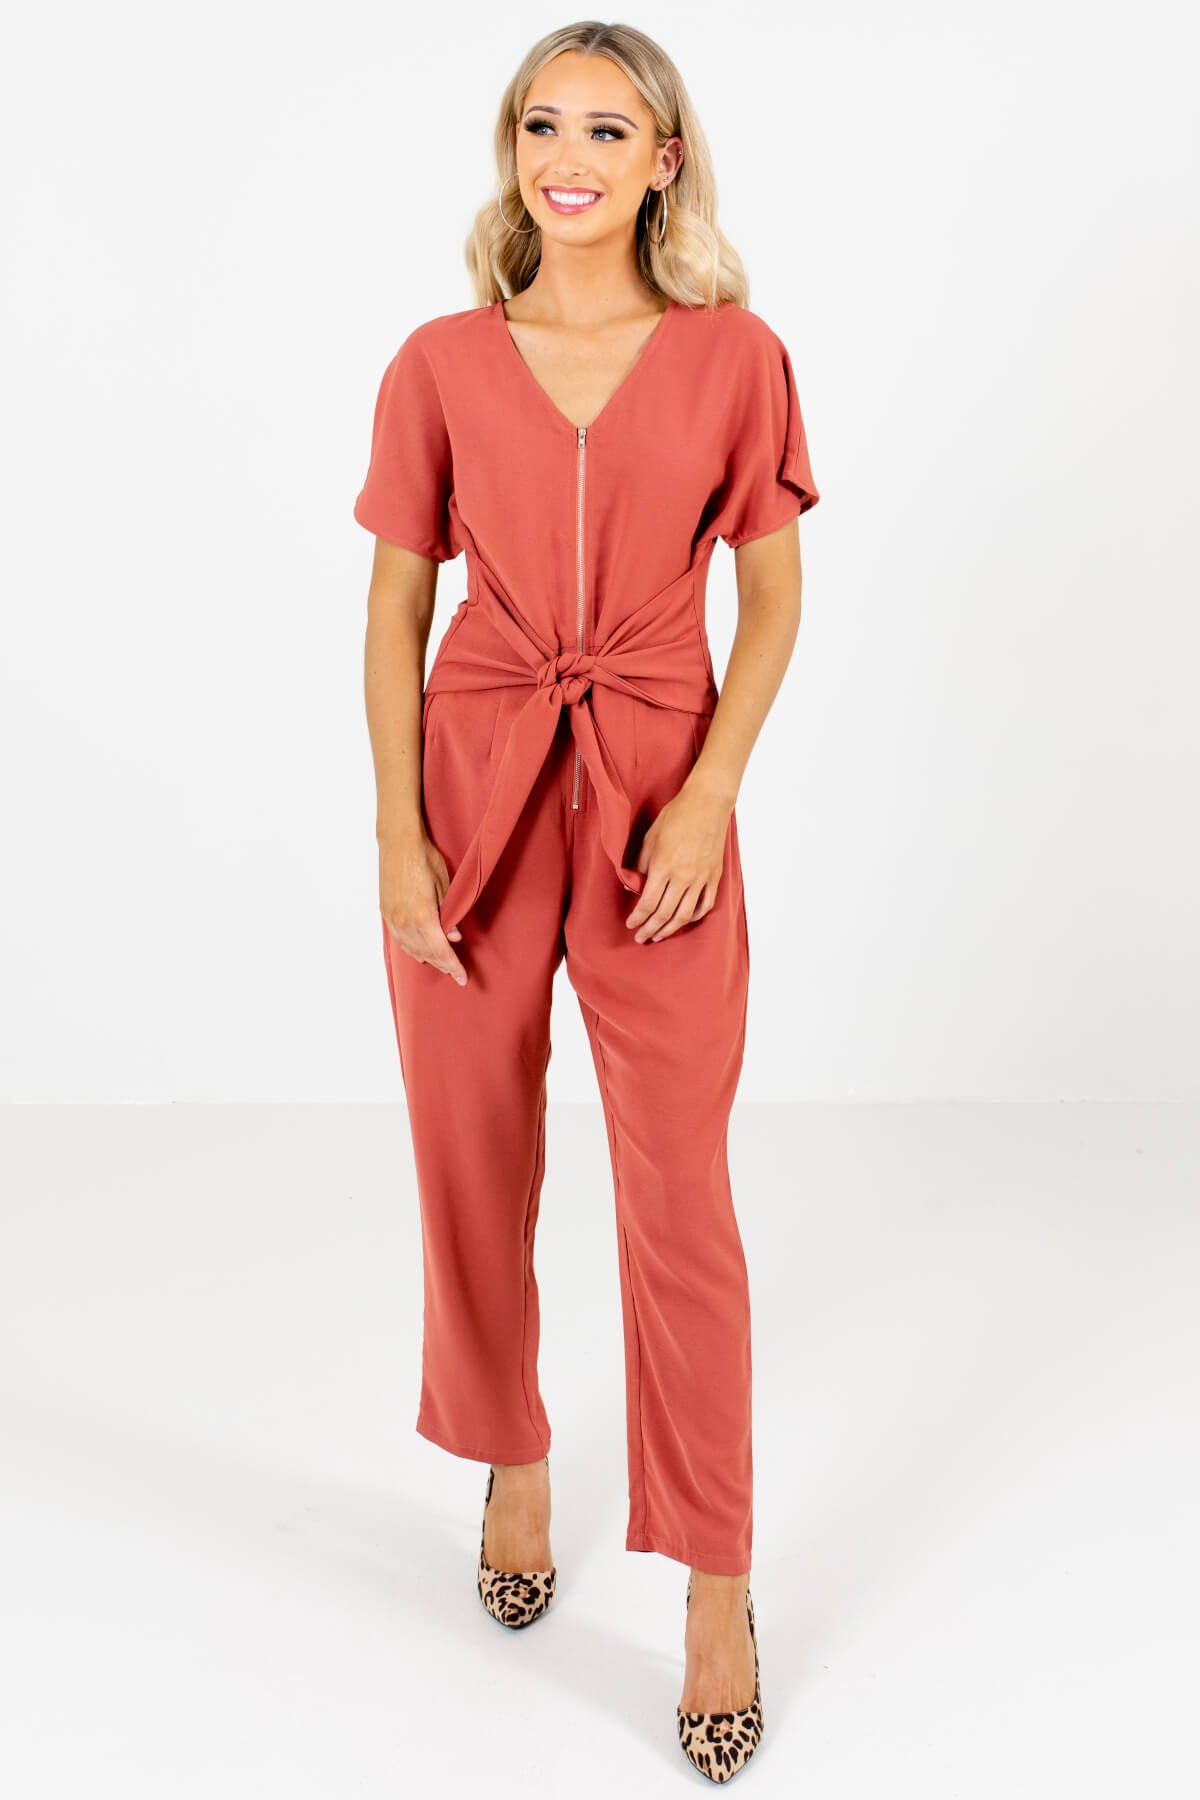 Dark Coral Zip-Up Bodice Boutique Jumpsuits for Women